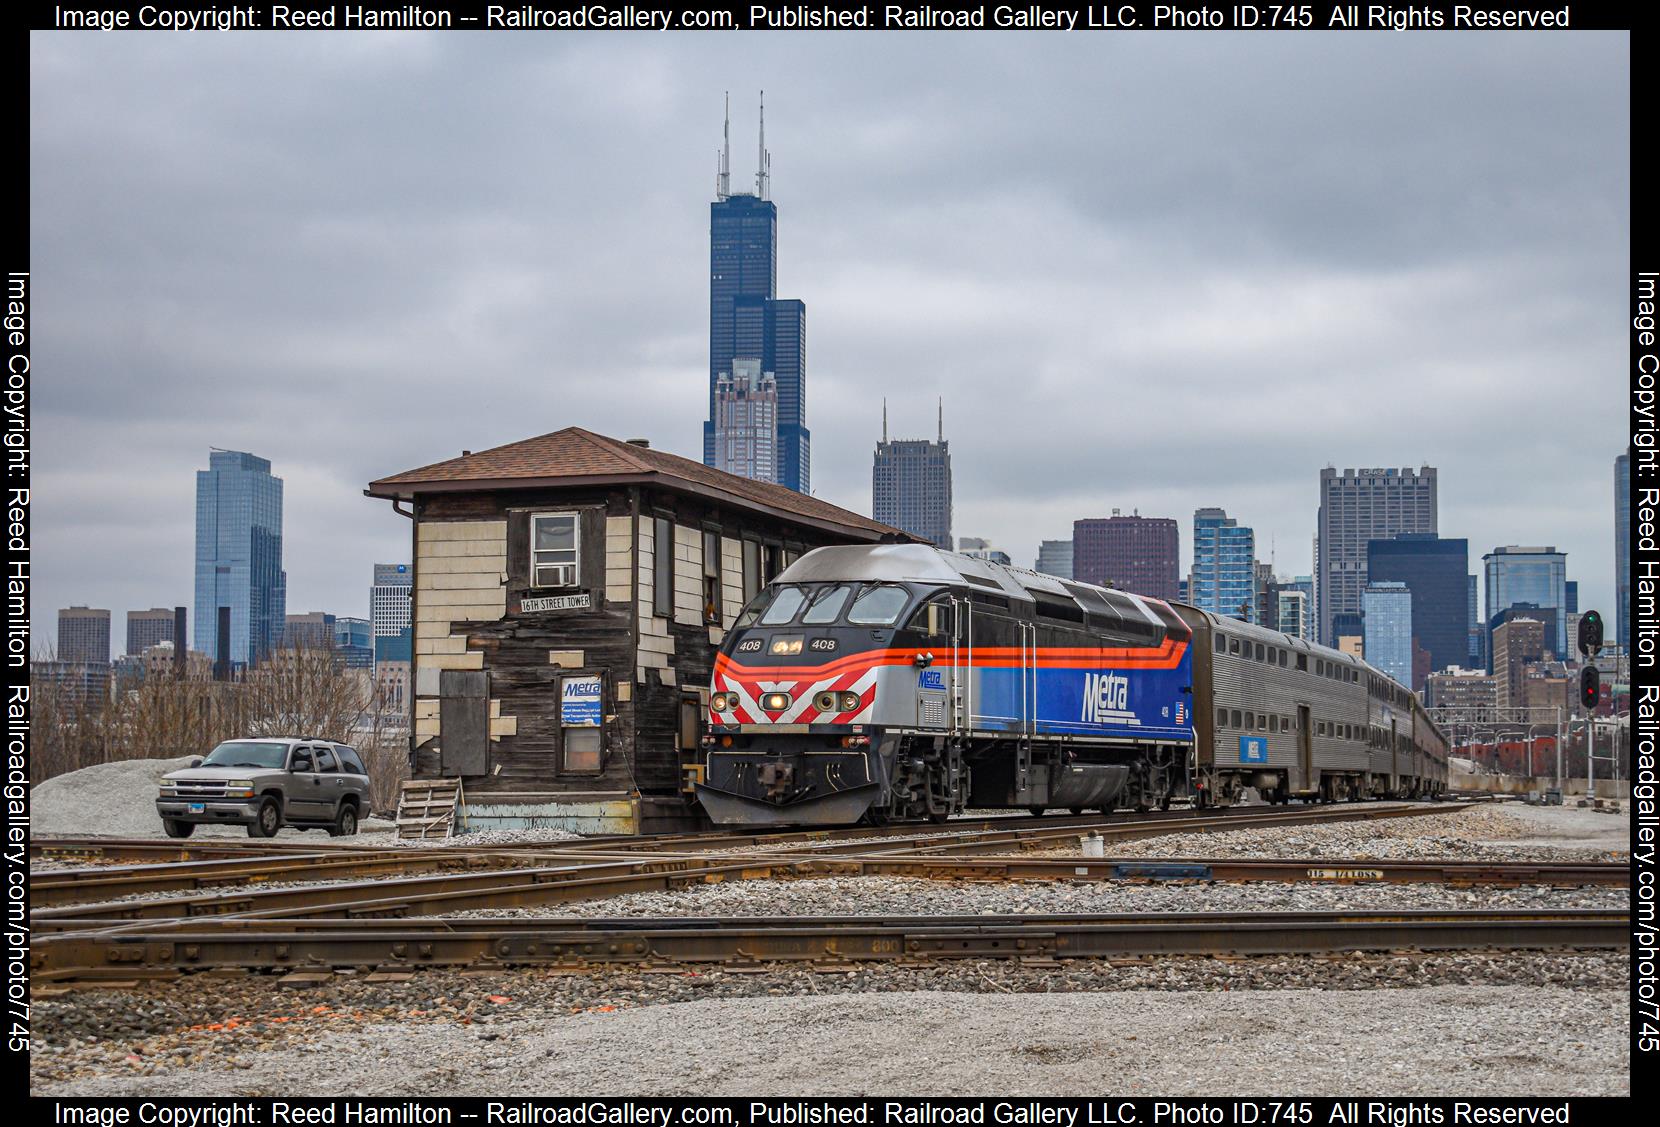 METX 408 is a class MPI MP36PH-3C and  is pictured in Chicago, Illinois , United States.  This was taken along the Rock Island District on the Metra. Photo Copyright: Reed Hamilton uploaded to Railroad Gallery on 02/24/2023. This photograph of METX 408 was taken on Monday, April 04, 2022. All Rights Reserved. 